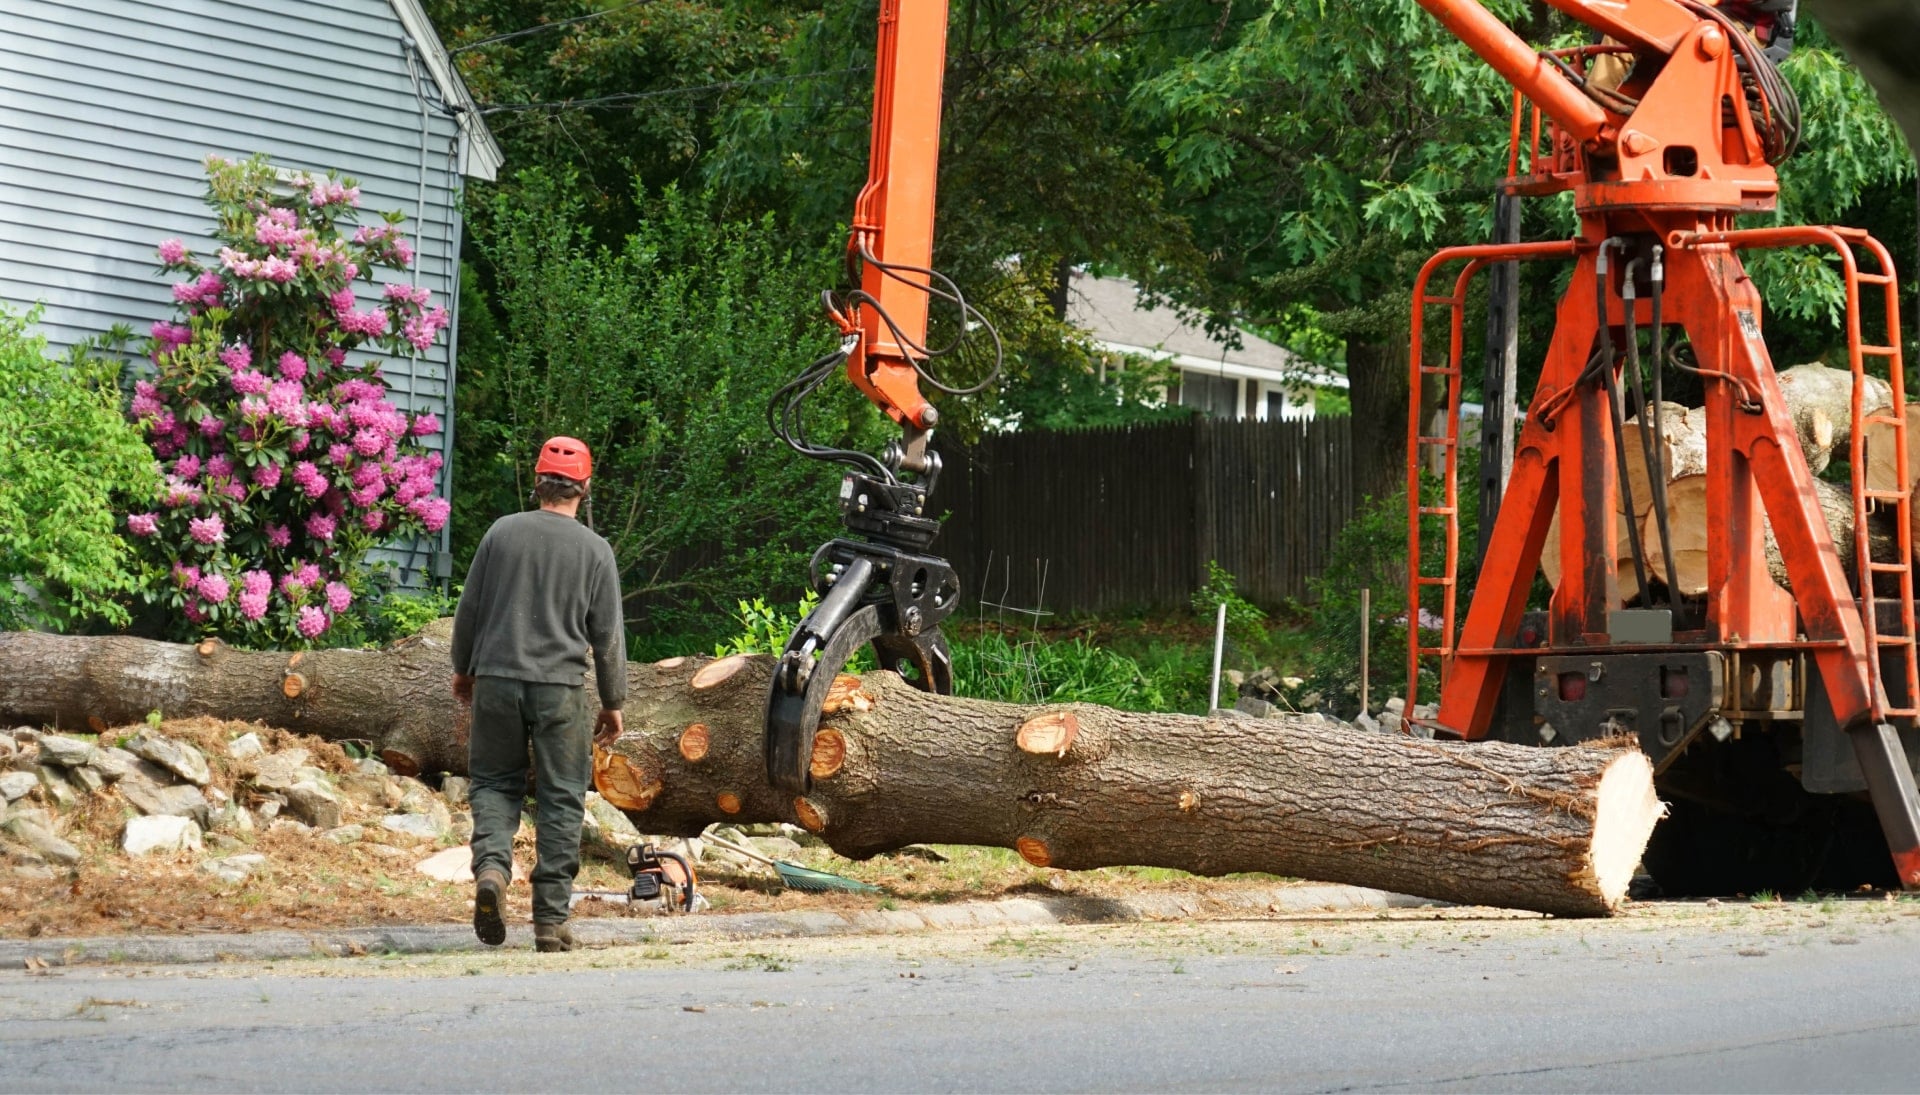 A tree stump has fallen and needs tree removal services in Denton, TX.